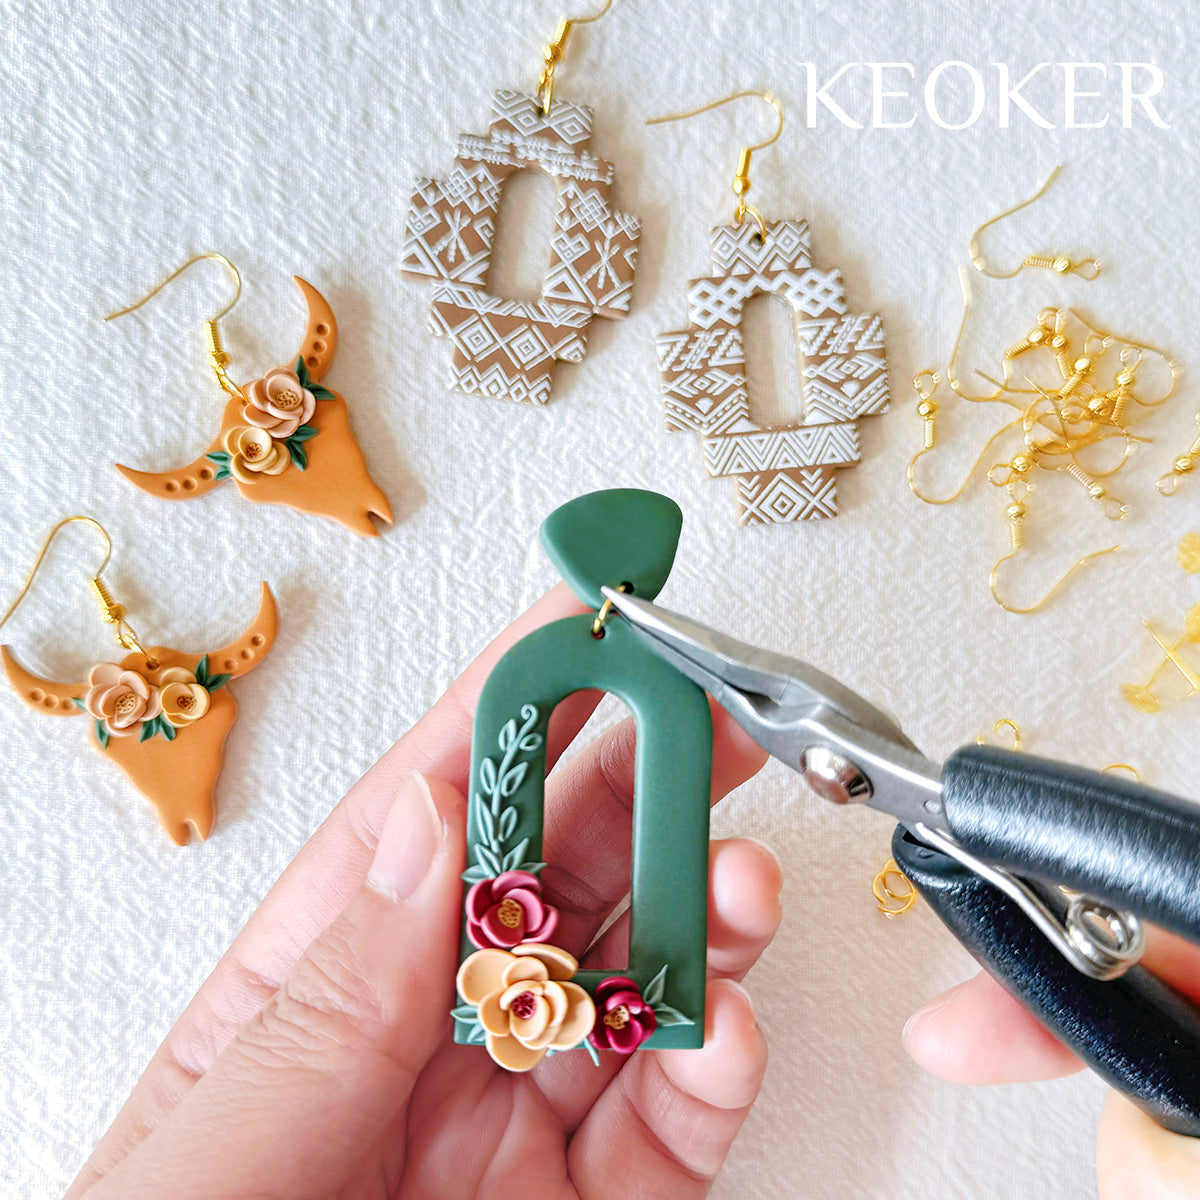 Keoker Polymer Clay Jewelry Making Kit, 103 PCS Clay Earring Making Kit for  Teens and Adults, Fashion Designer Kits for Girls, Polymer Clay Earrings